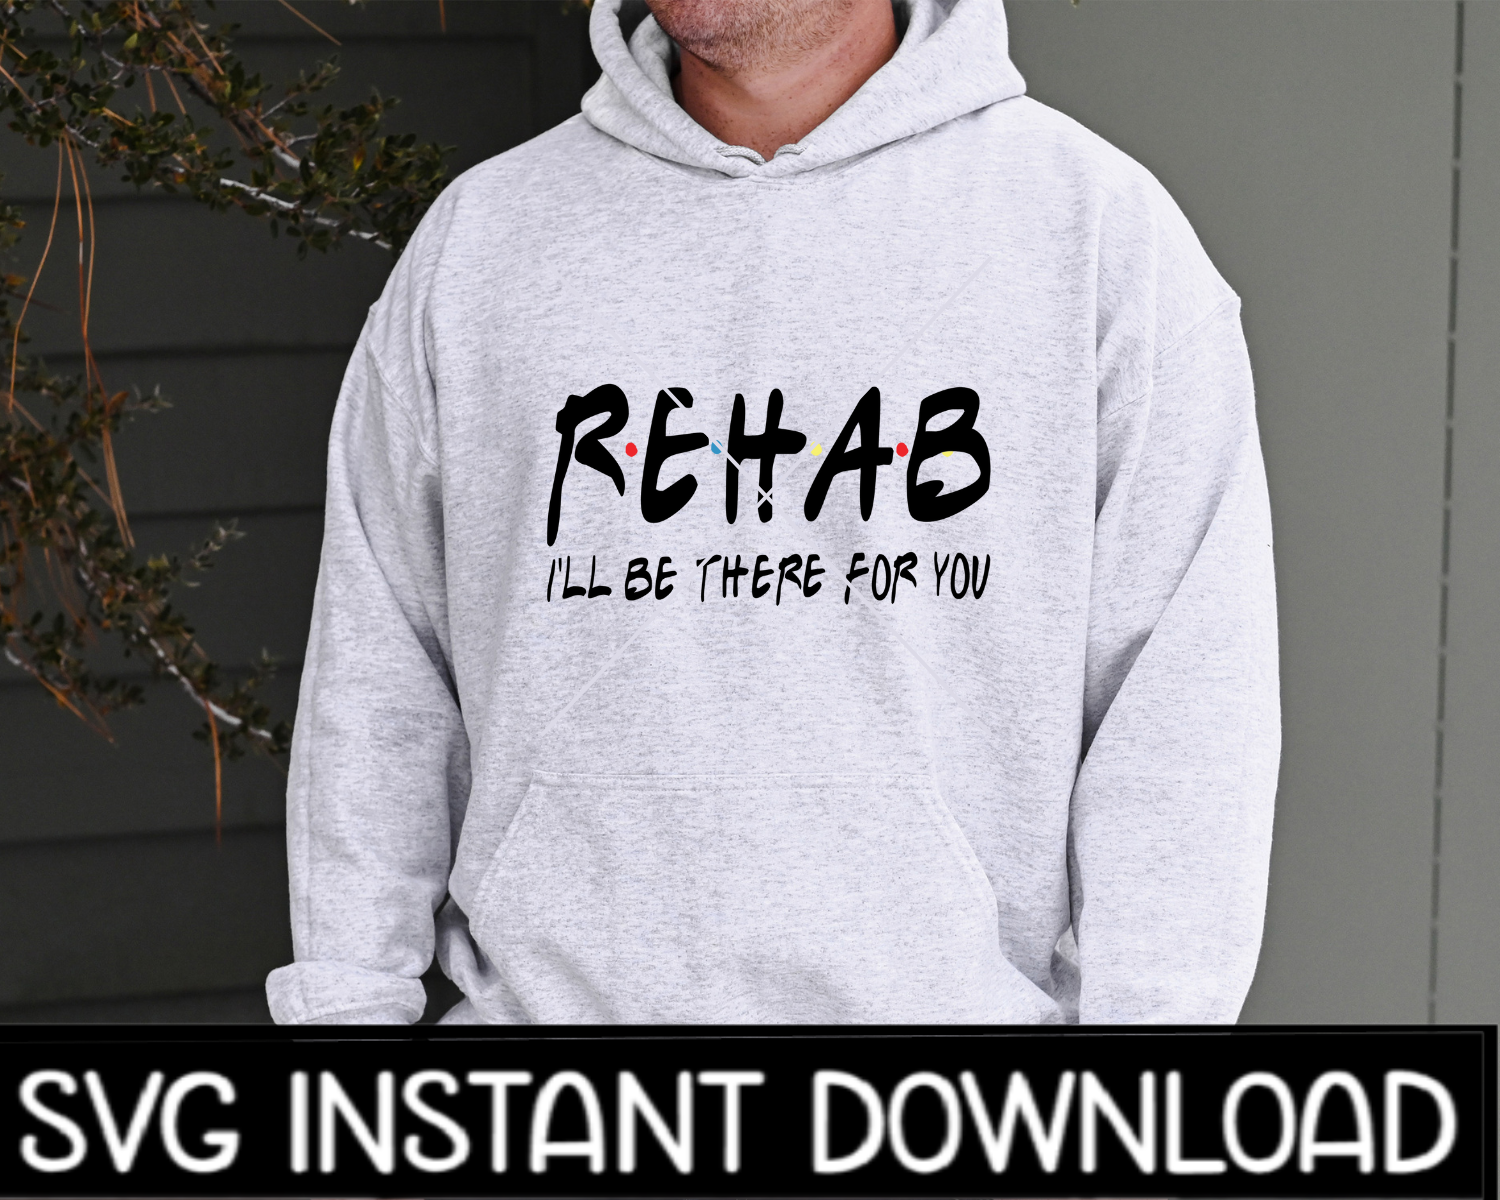 Rehab I'll Be There For You SVG, Rehab I'll Be There For You SVG Files Instant Download, Cricut Cut Files, Silhouette Cut Files, Download